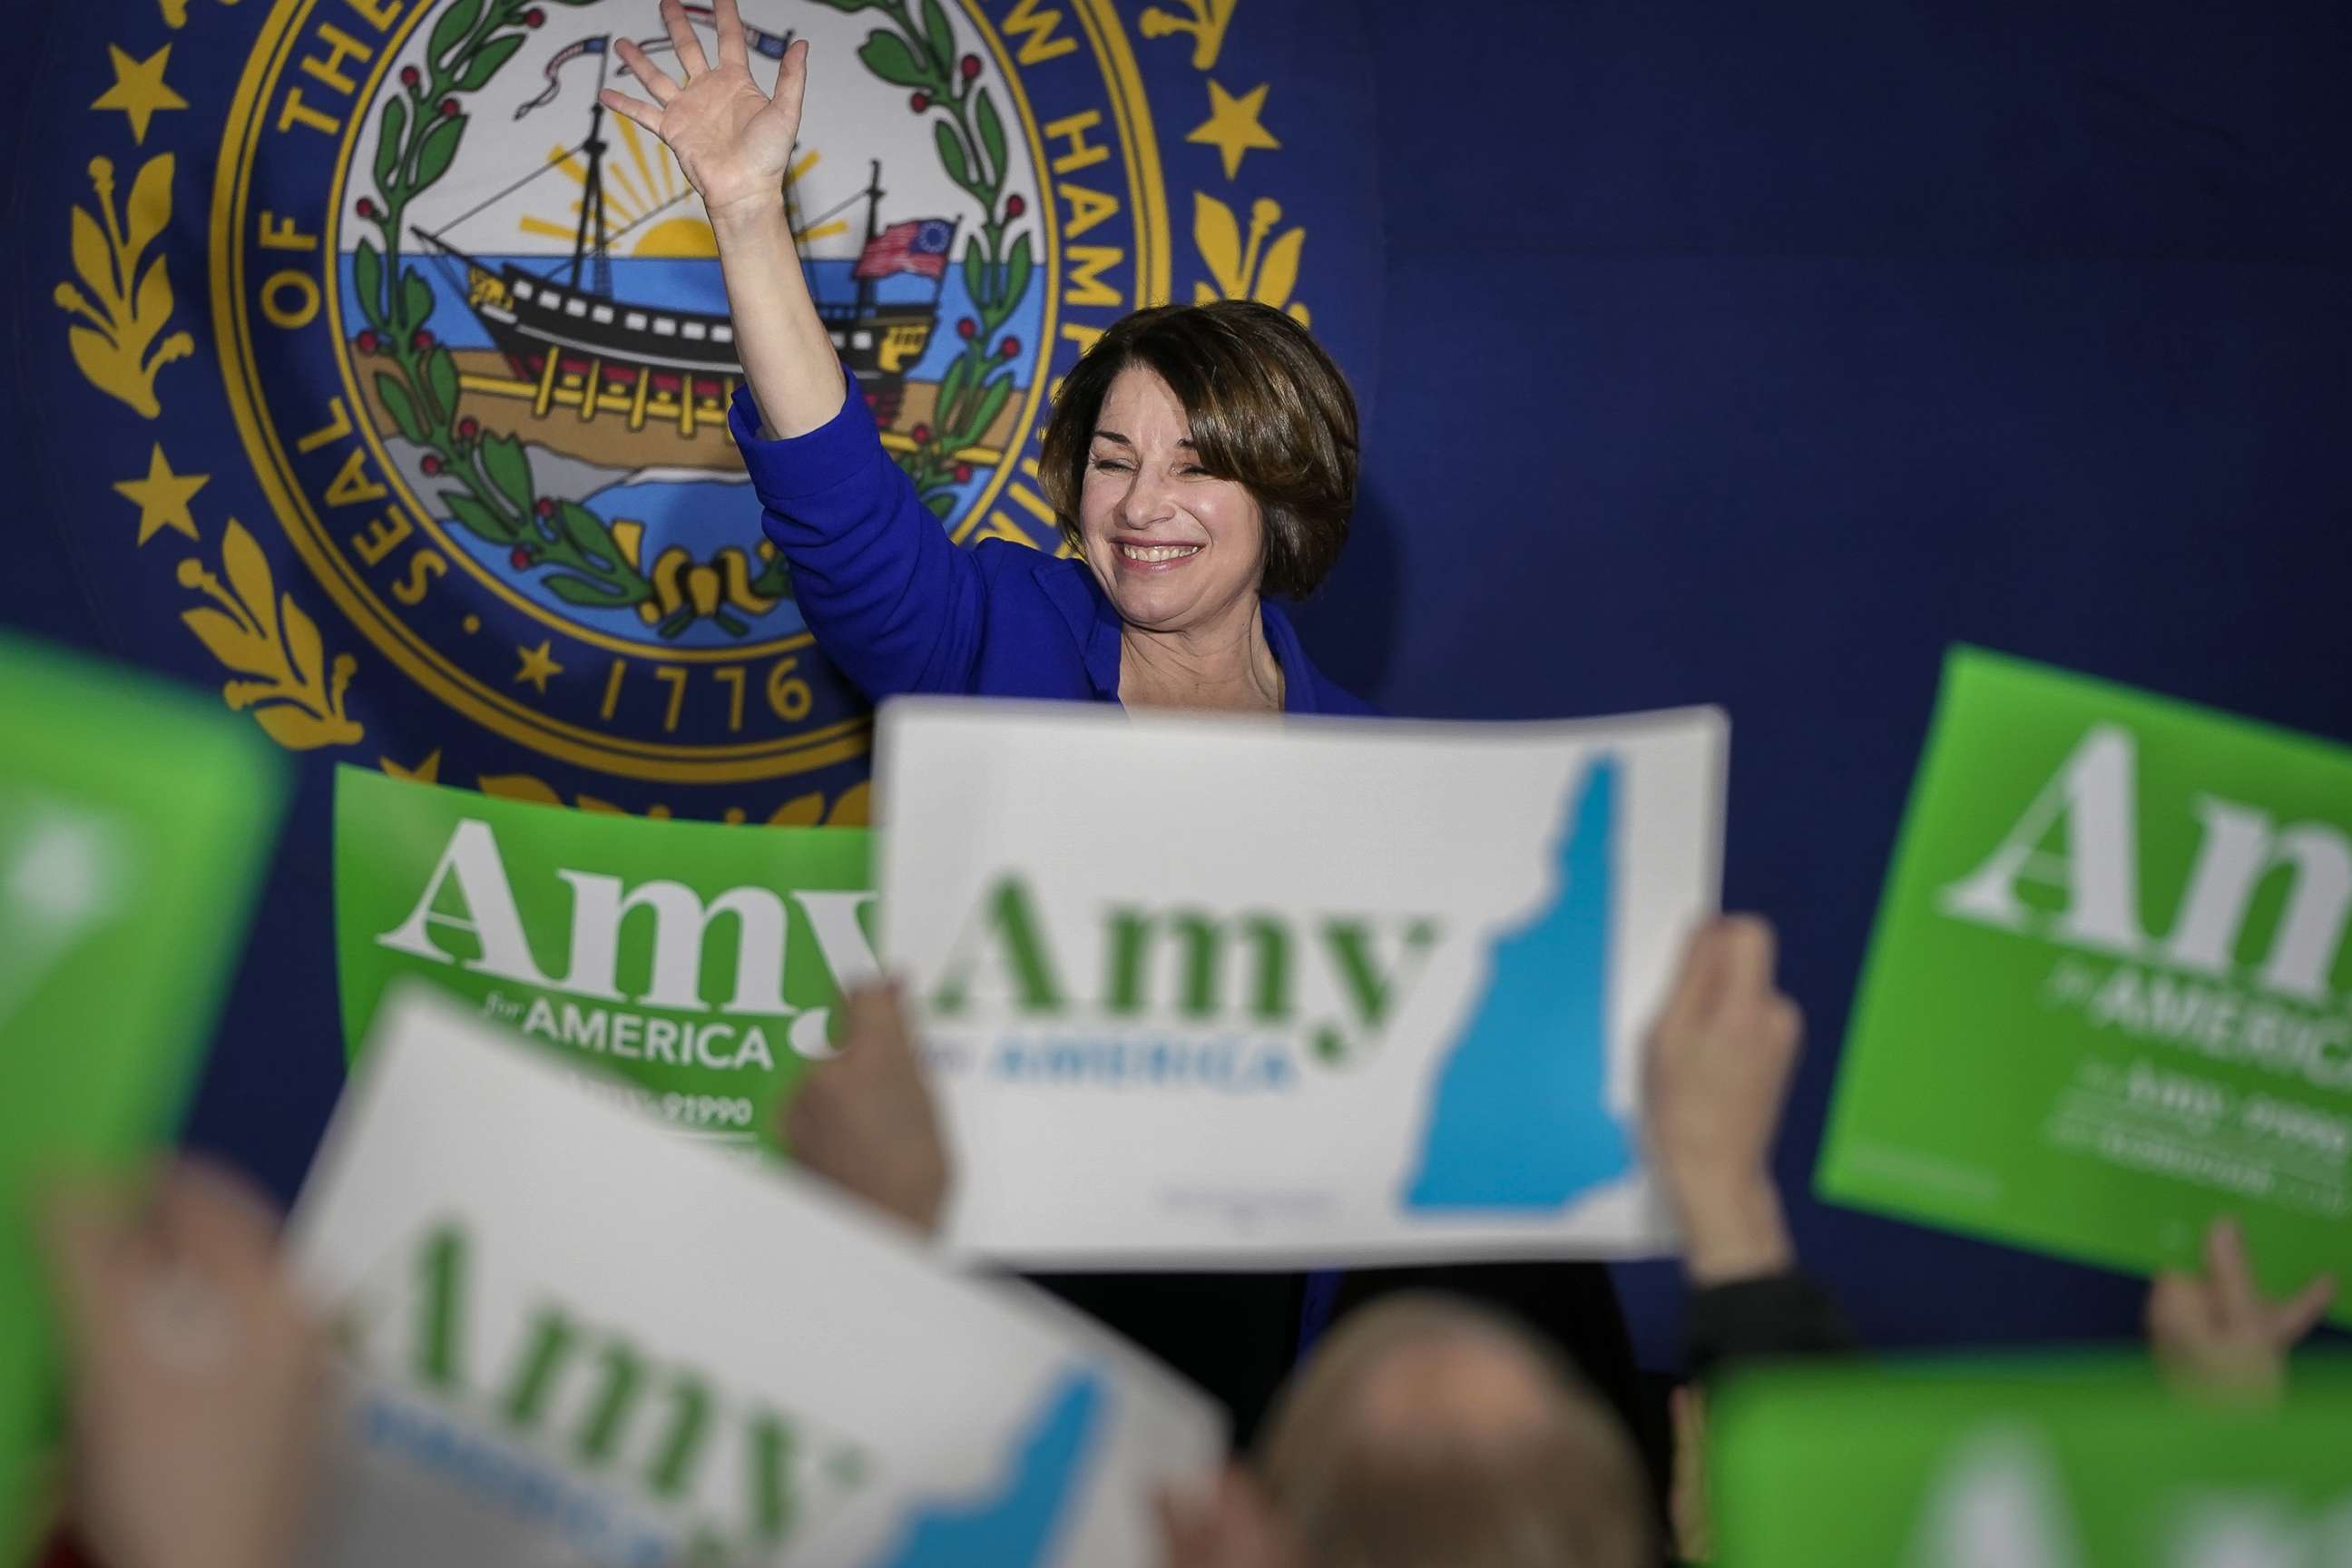 PHOTO: Democratic presidential candidate Sen. Amy Klobuchar waves after speaking during a Get Out The Vote event at the University of Southern New Hampshire in Manchester, N.H., Feb. 9, 2020.